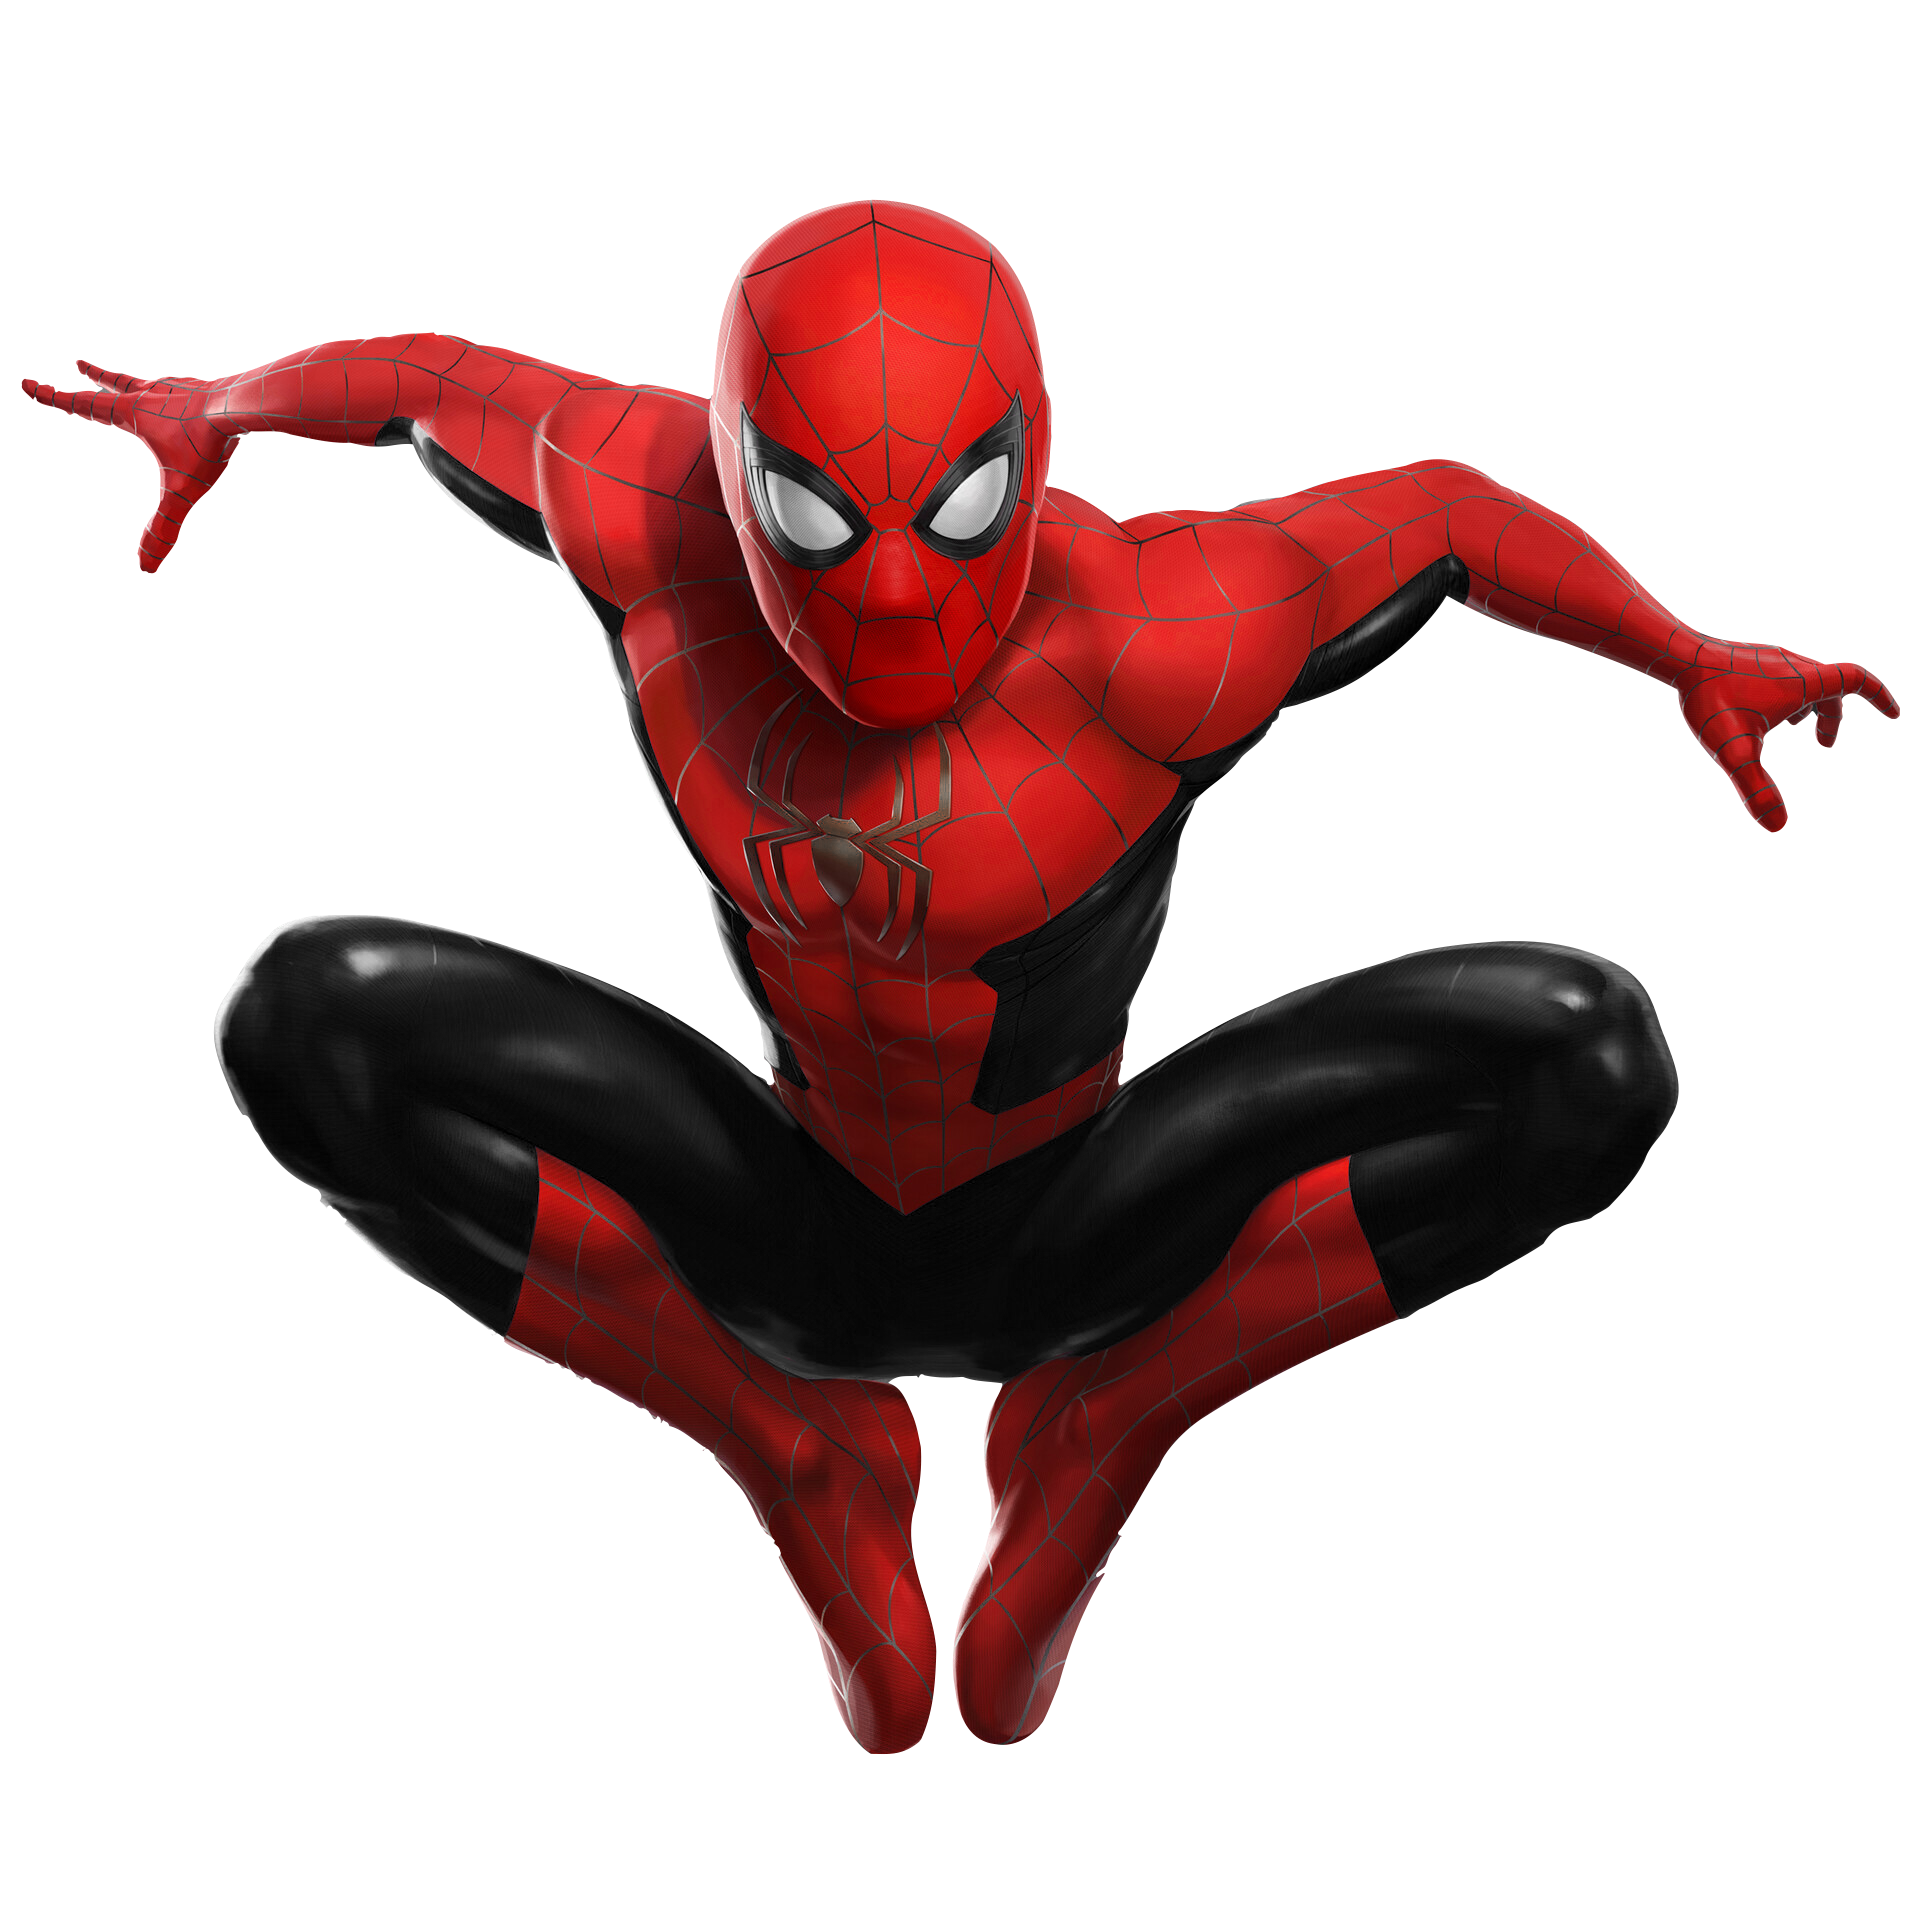 Spider-Man (Red and Black Suit) - PNG (2) by DHV123 on DeviantArt